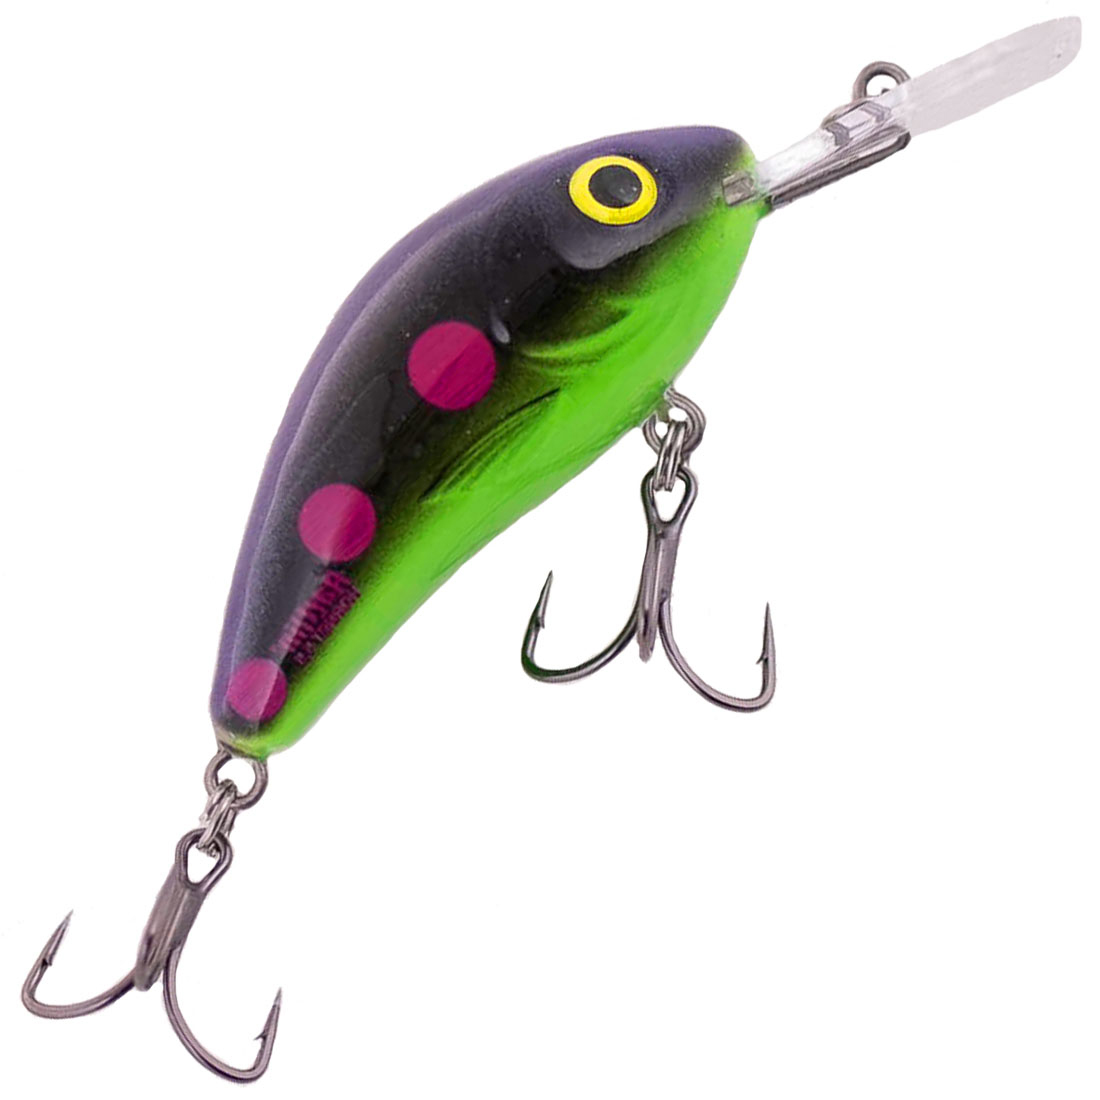 Fly Fishing Material, Hornet Fishing Lure